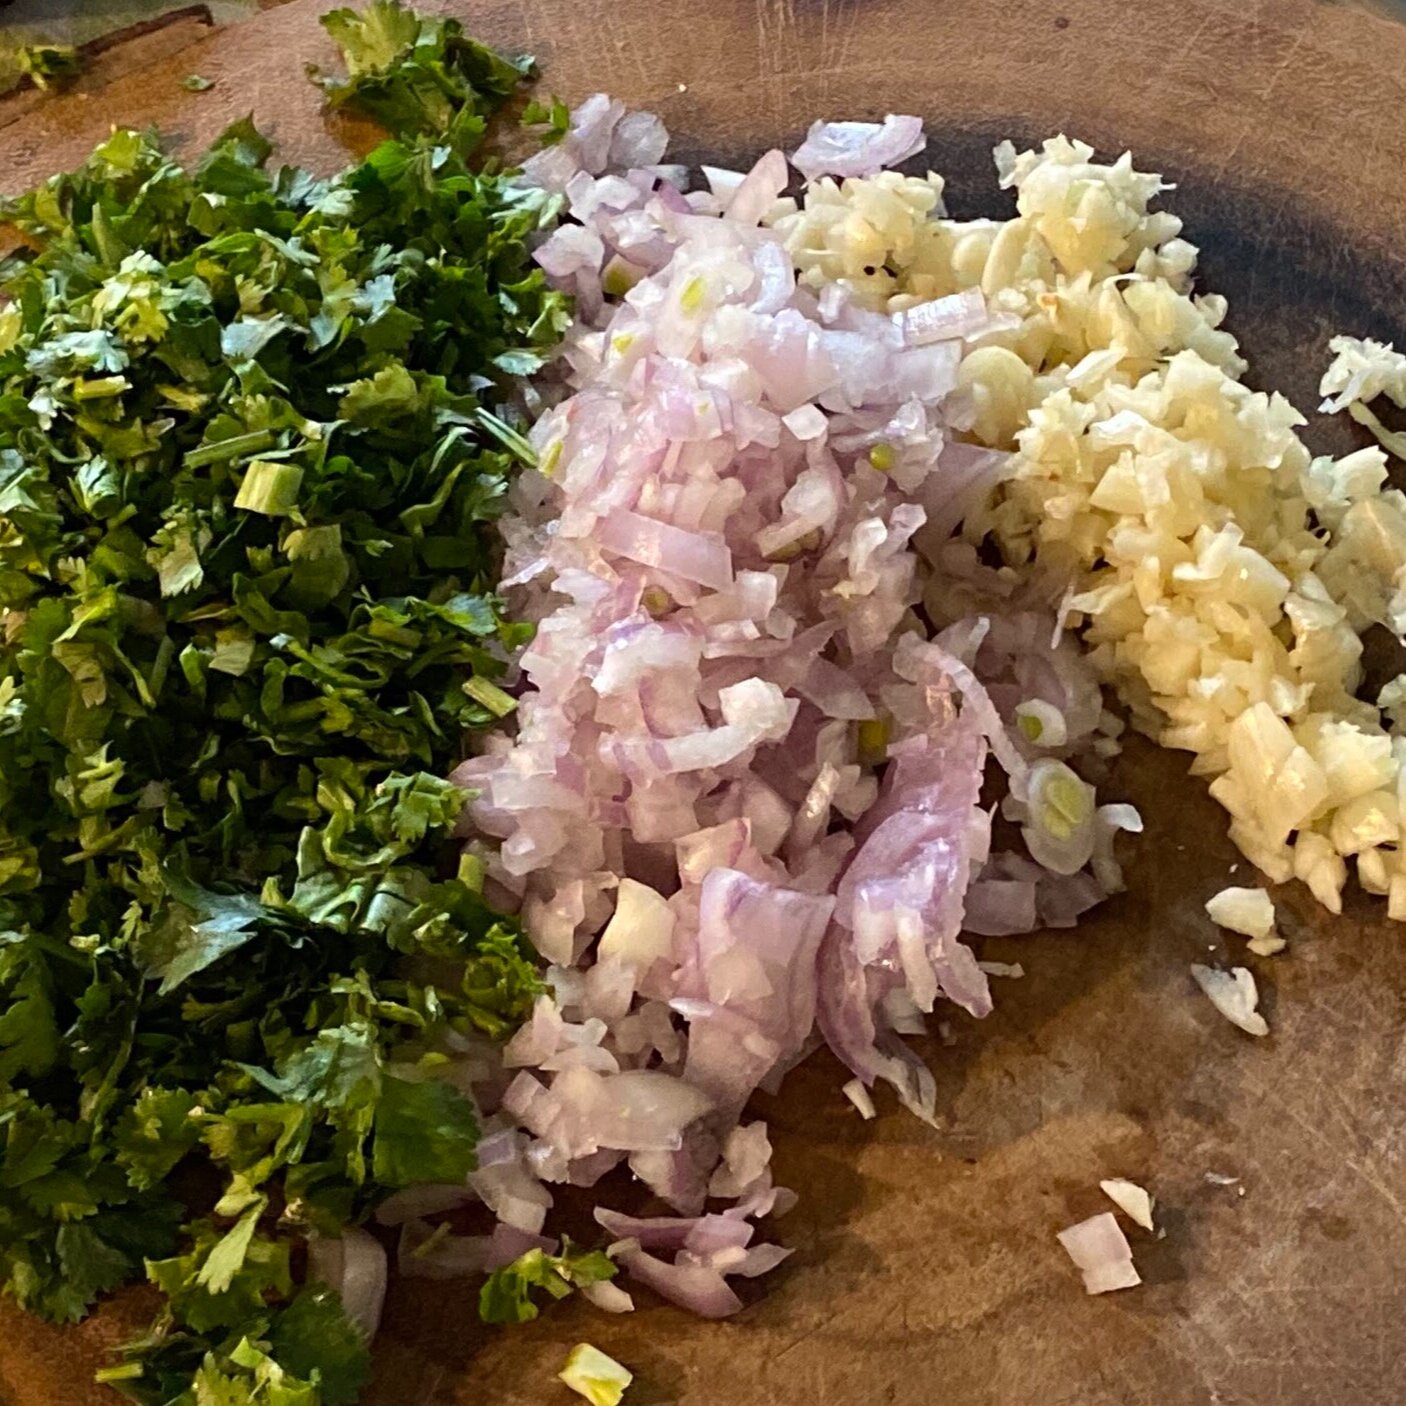 Chopped and minced ingredients